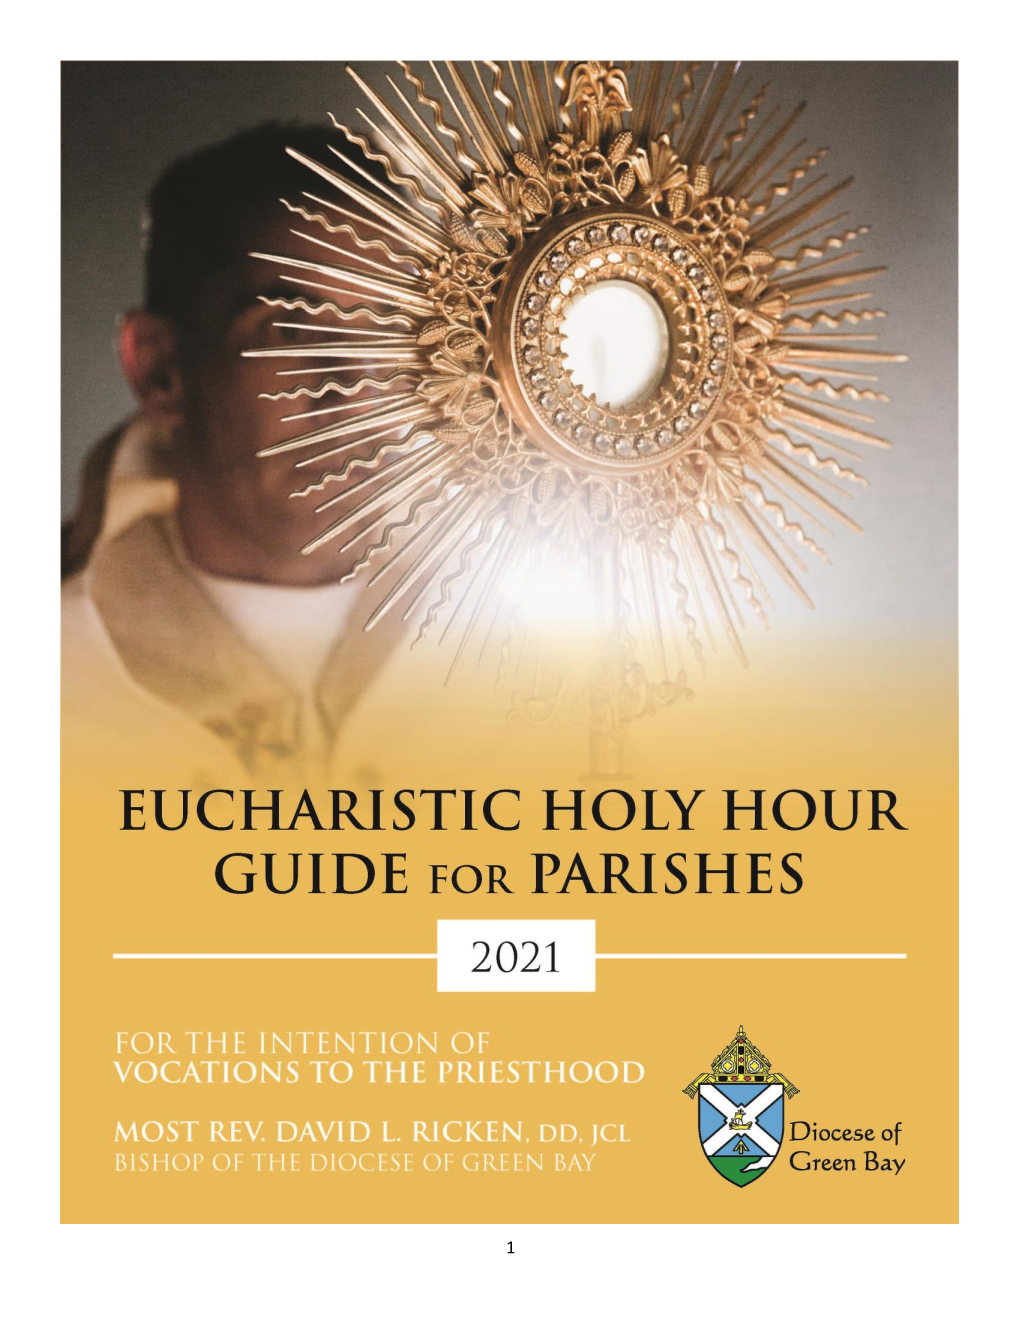 2021 Eucharistic Holy Hour Guide for Parishes